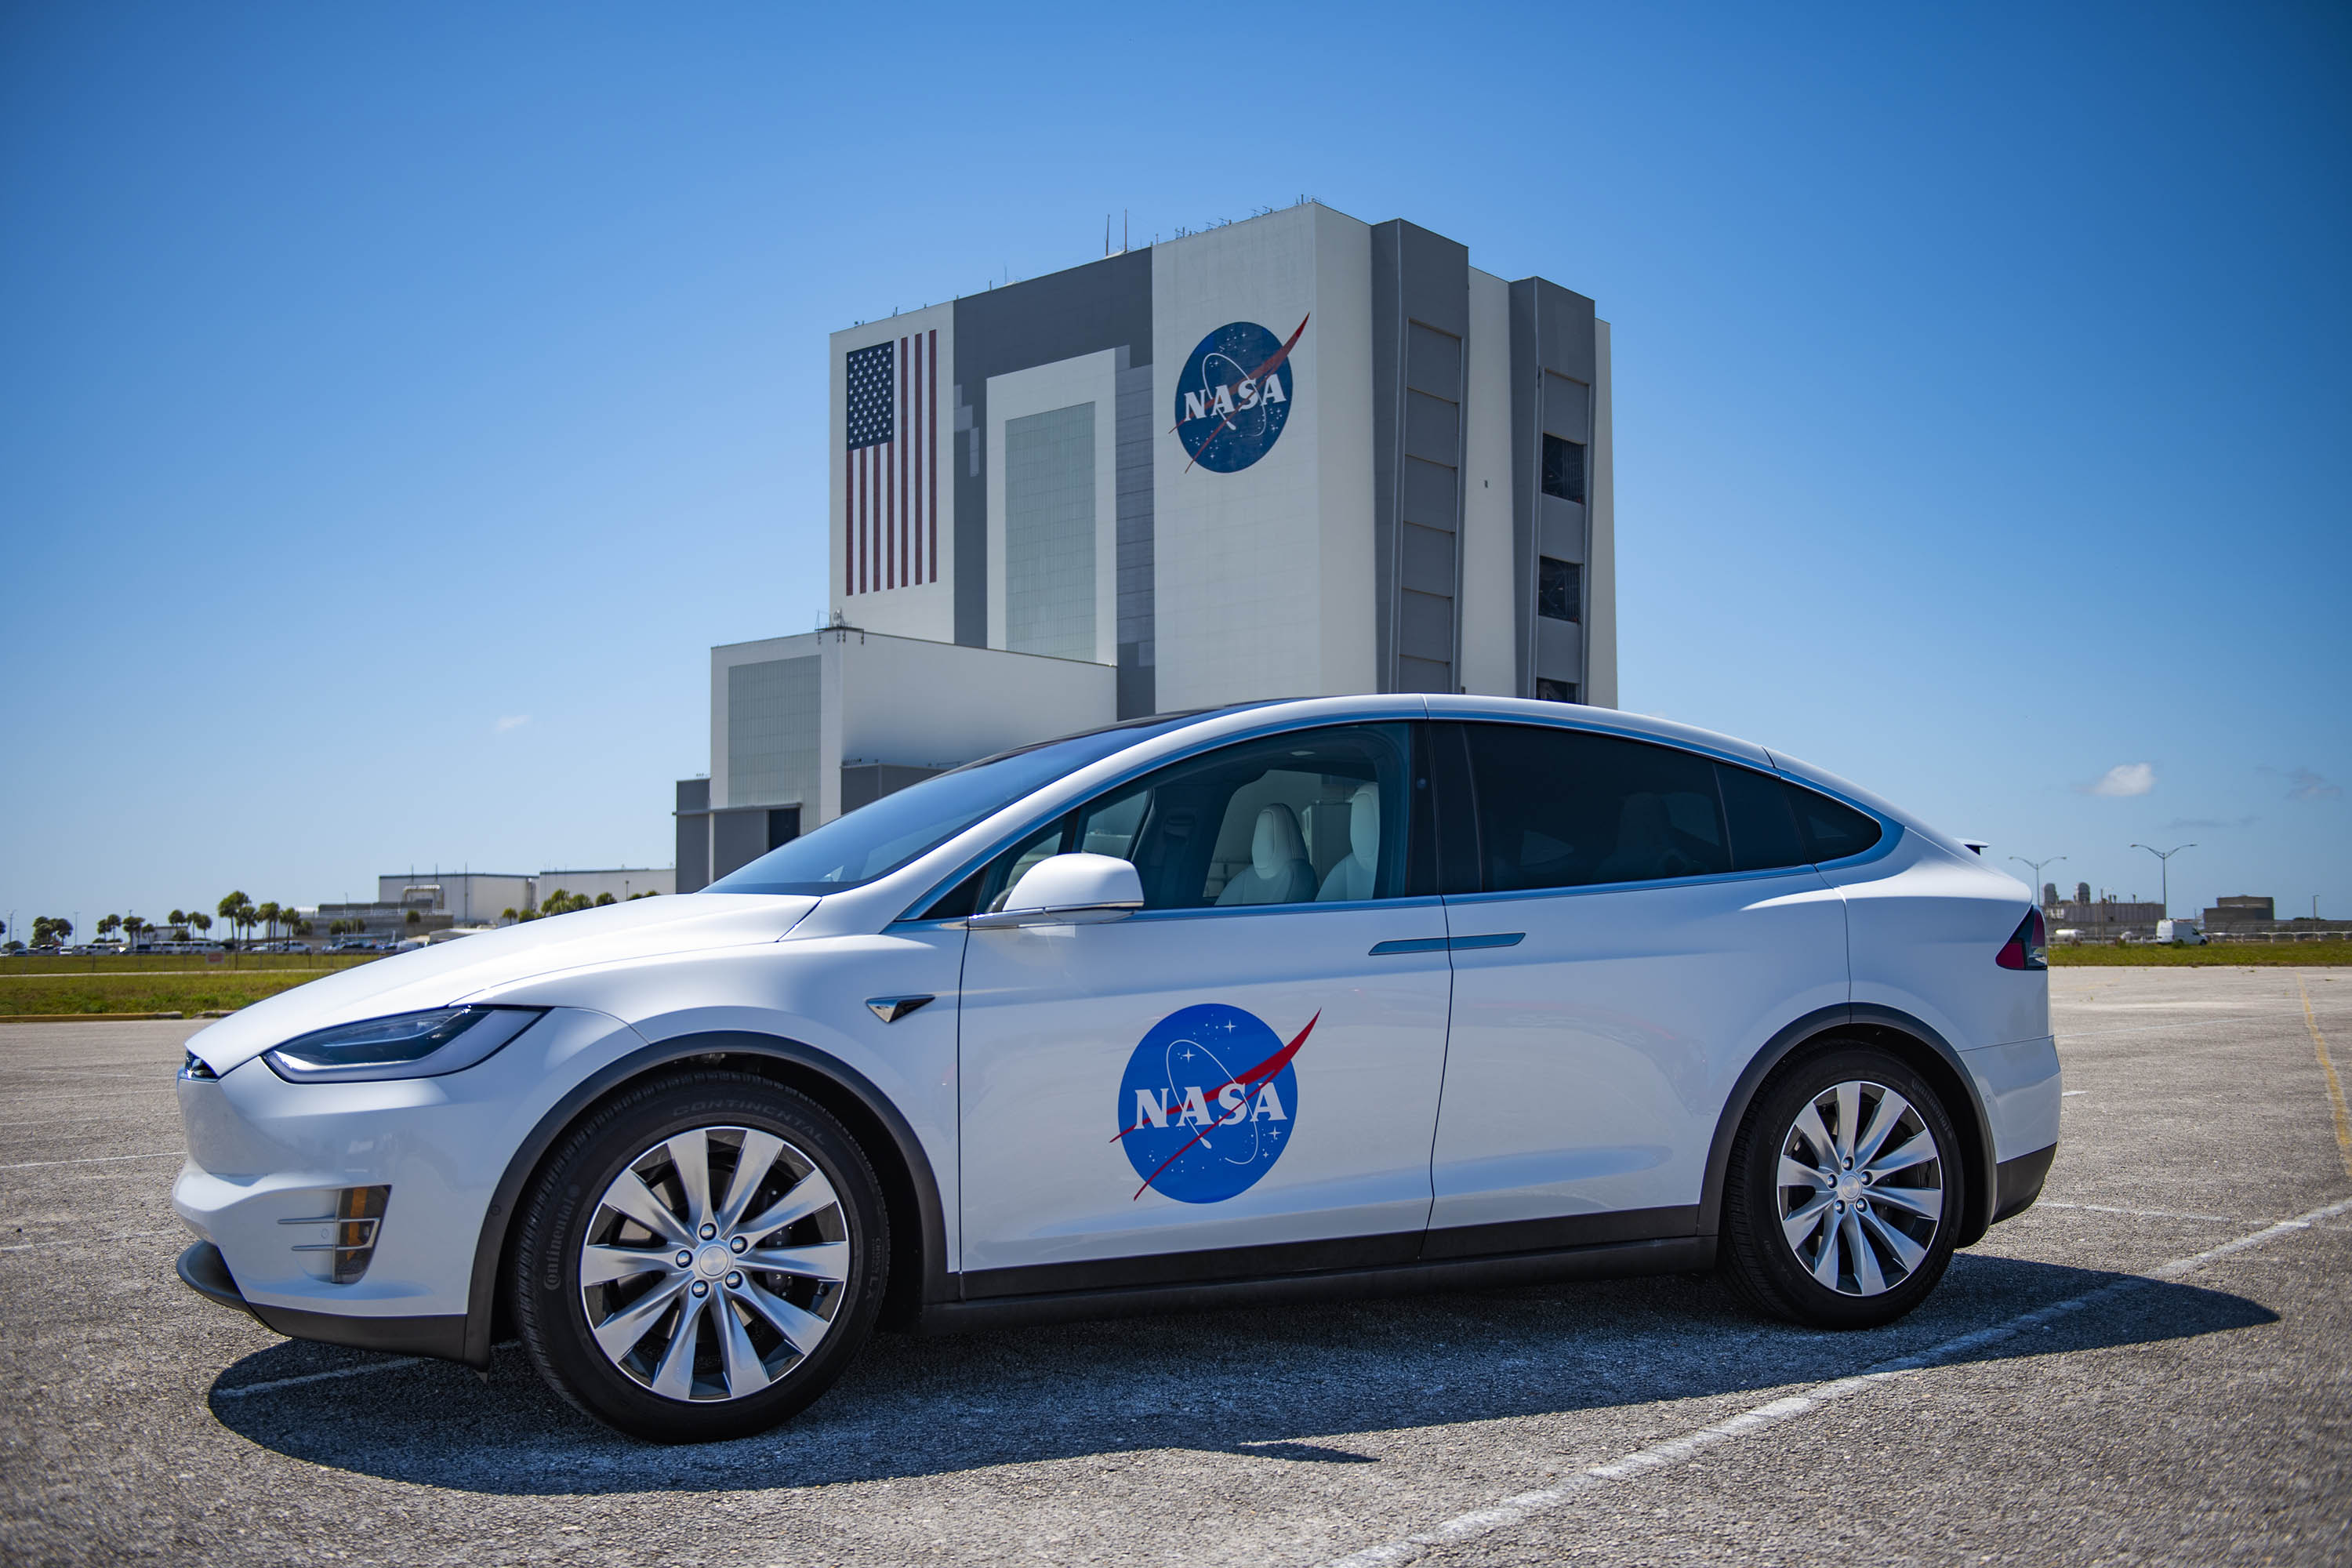 NASA Astronauts will arrive in a Tesla to the launch pad for SpaceX's first crewed mission